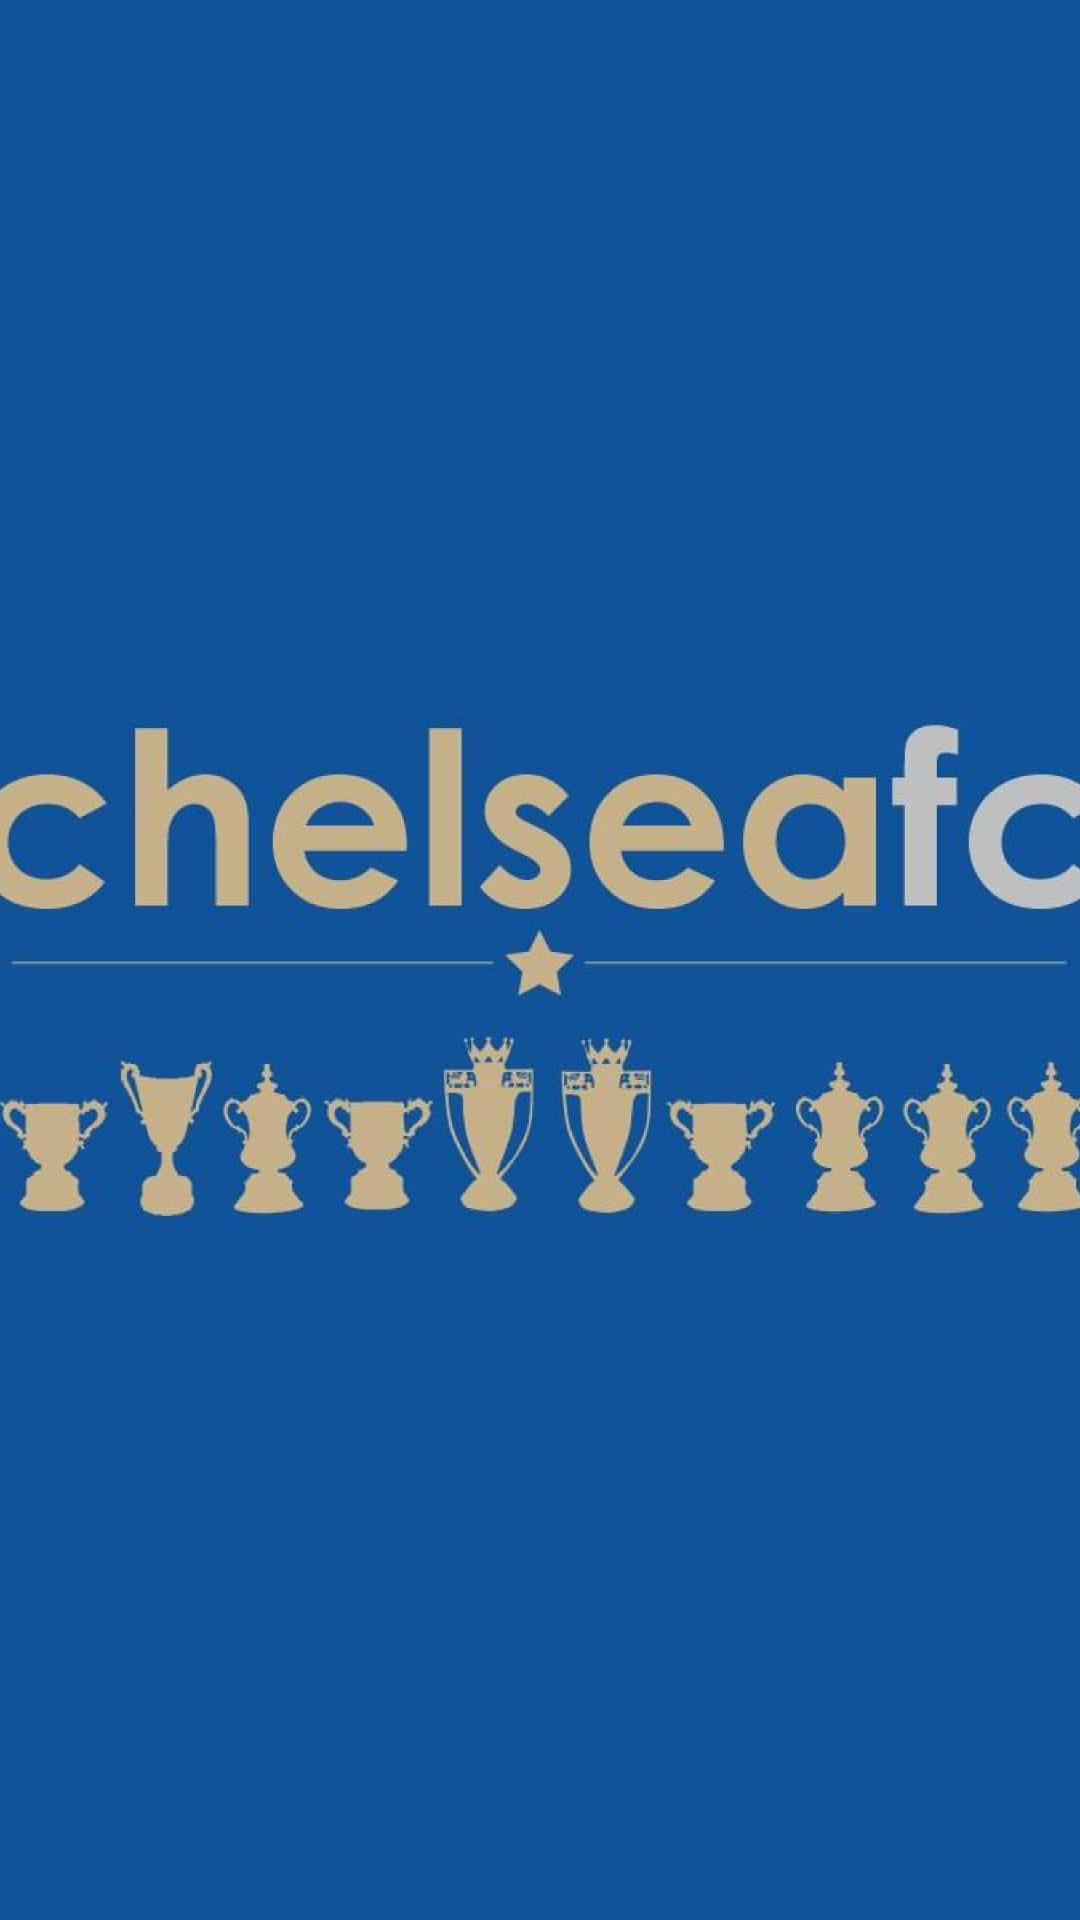 Chelsea Fc Logo On A Blue Background Wallpaper